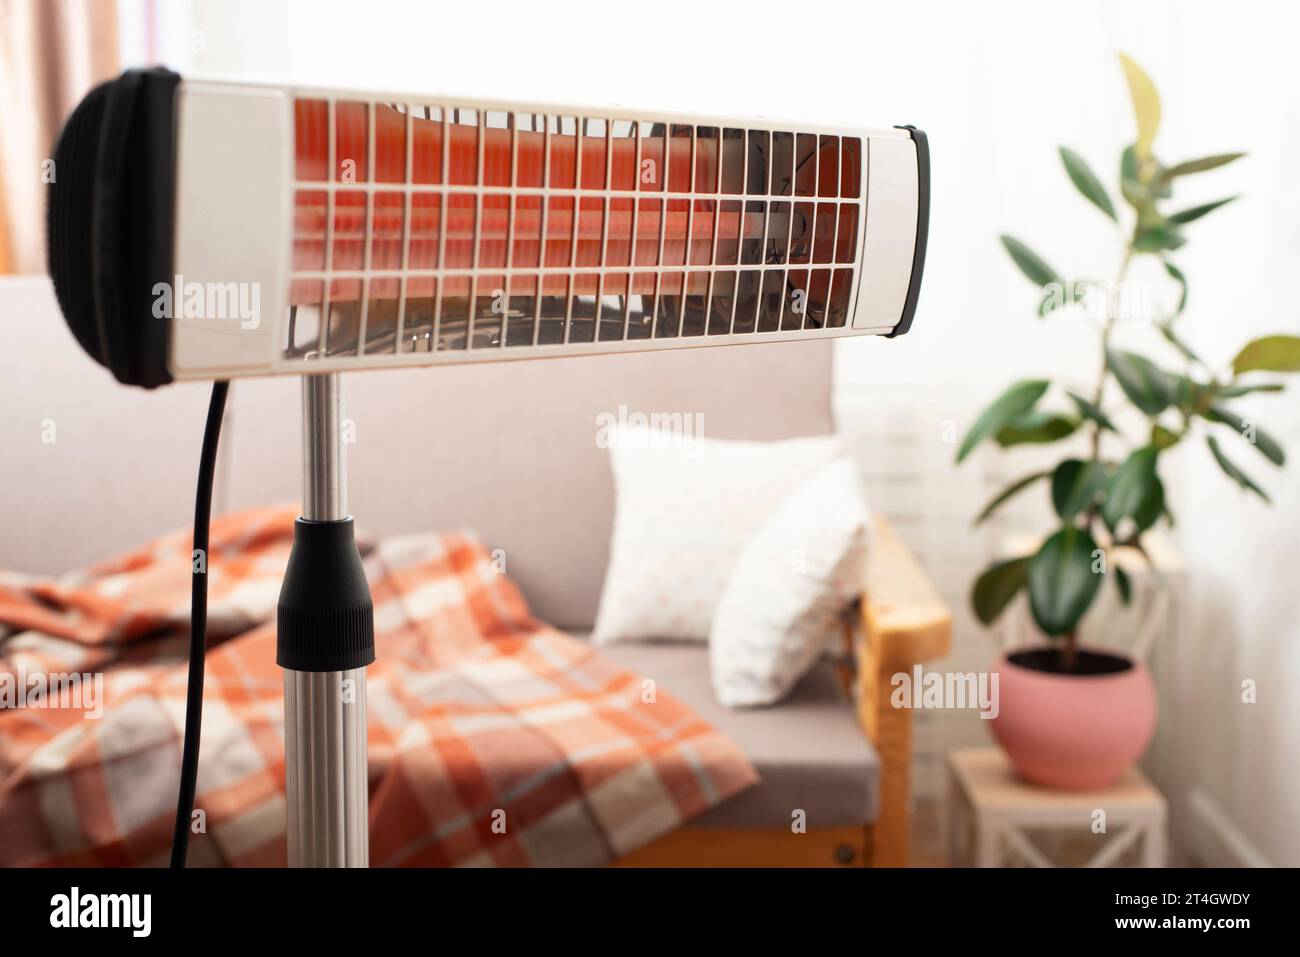 Electric infrared heater warming up living room with sofa and potted plant at background Stock Photo